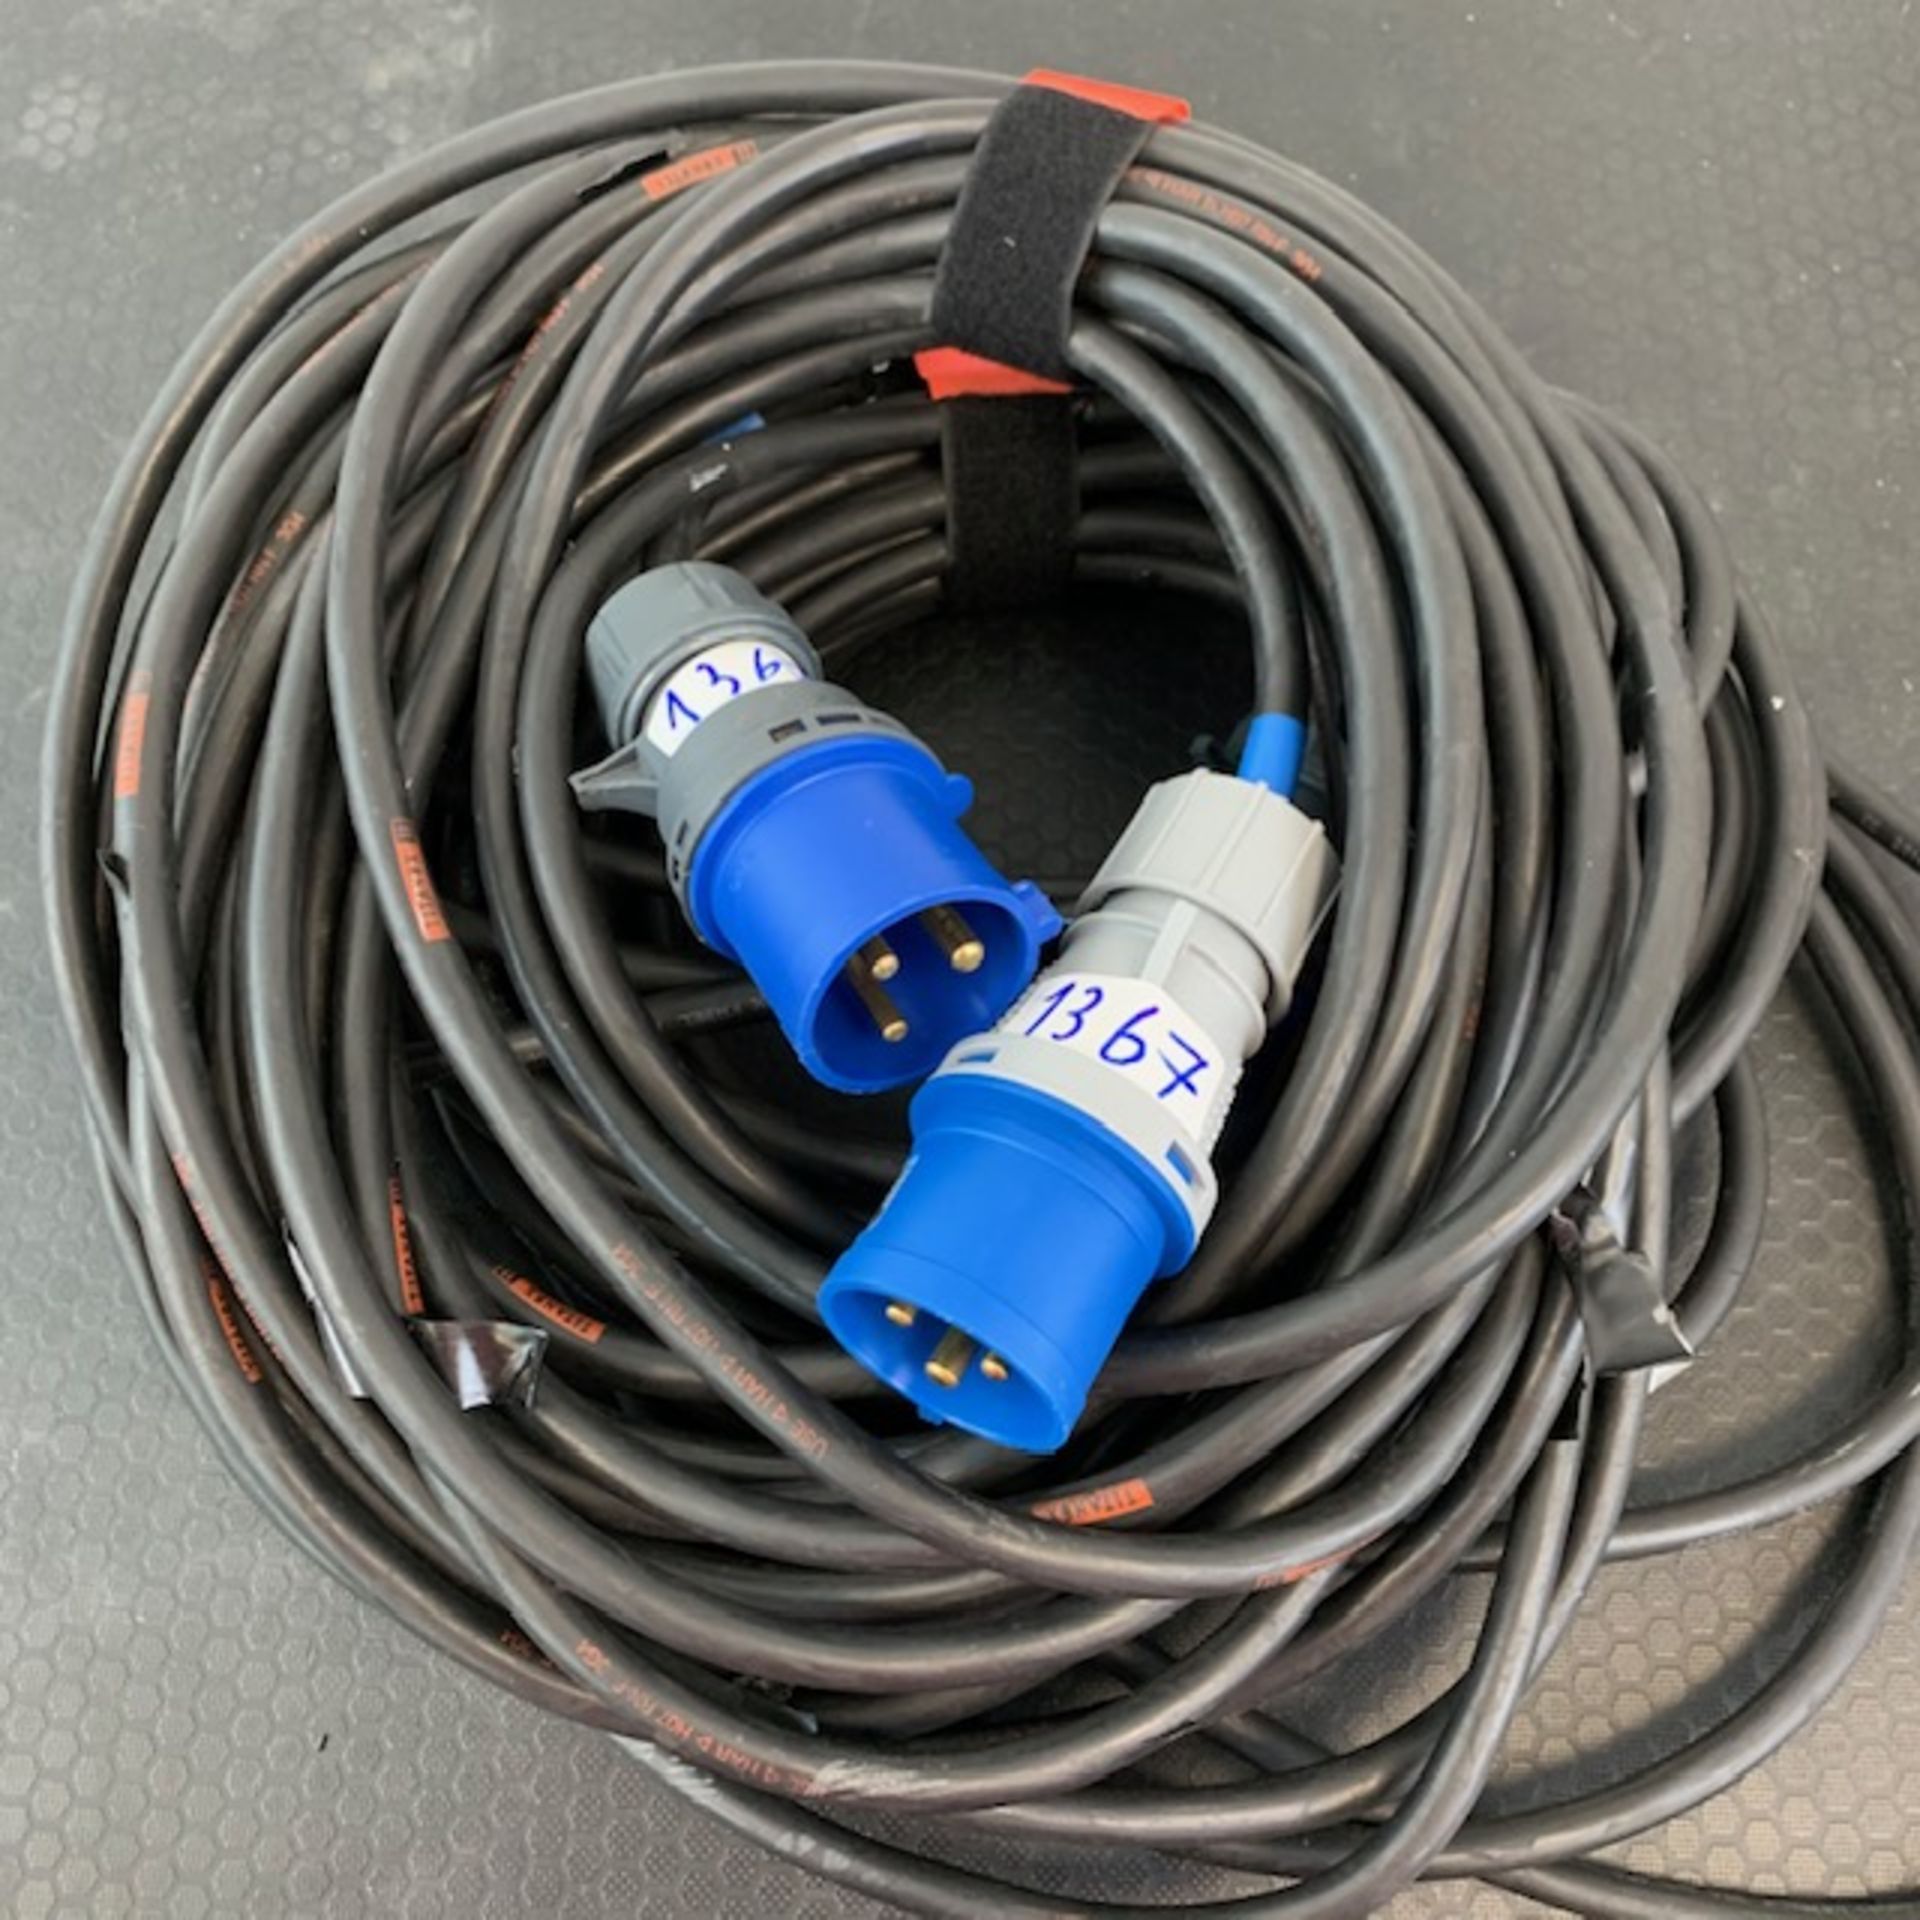 2 X 32Amp Single Phase 20M Cable - Ref: 1367 - CL581 - Location: Altrincham WA14Items will be